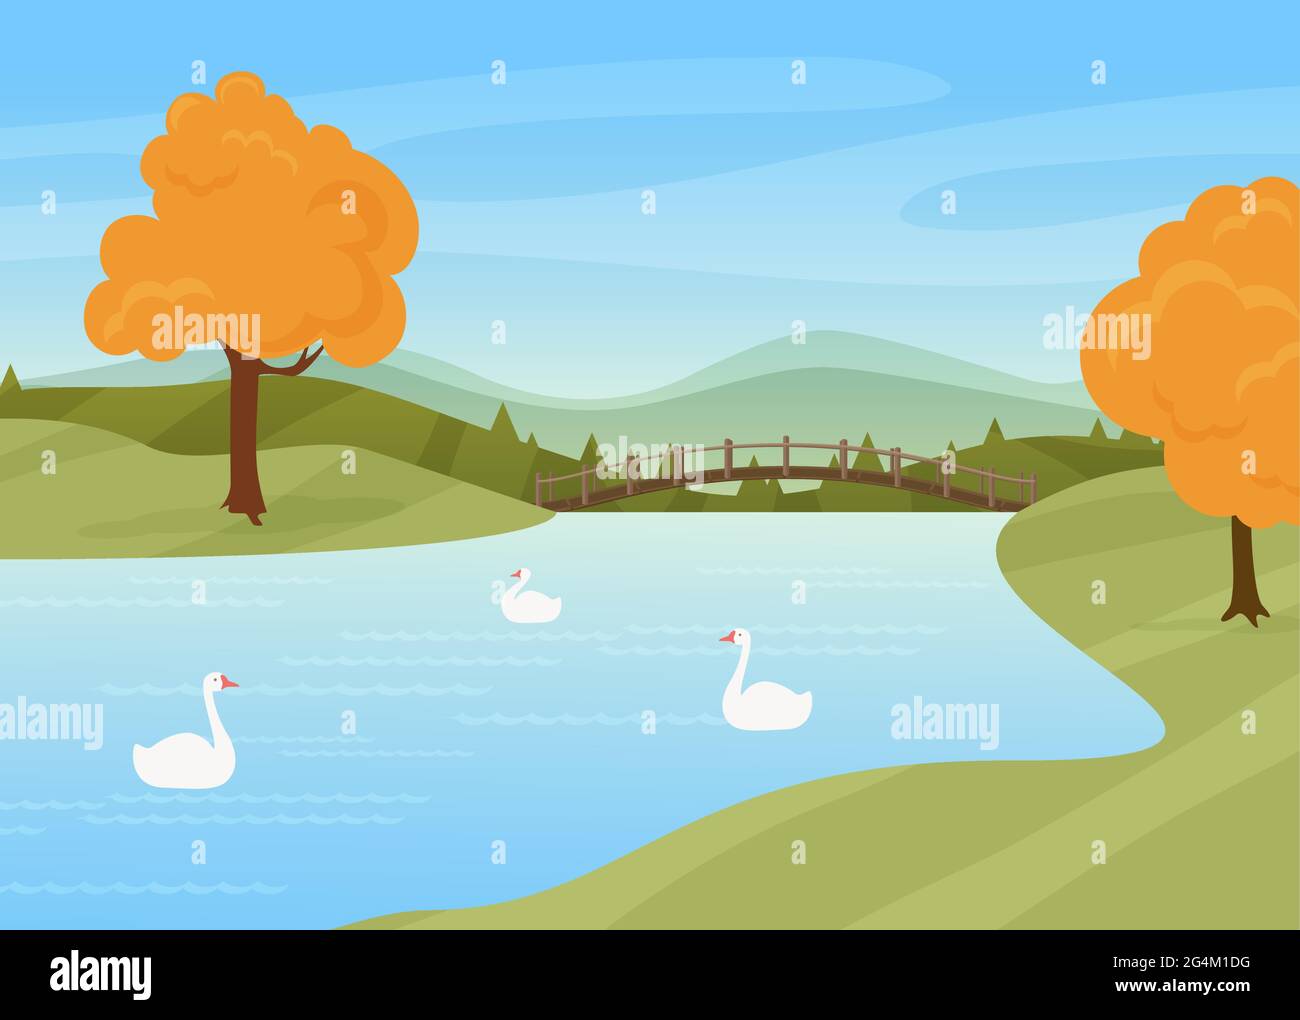 Swans swim in river, rural autumn nature landscape vector illustration. Cartoon wild birds on water surface, bridge over river or lake, trees with yellow autumnal leaves stand by riverside background Stock Vector